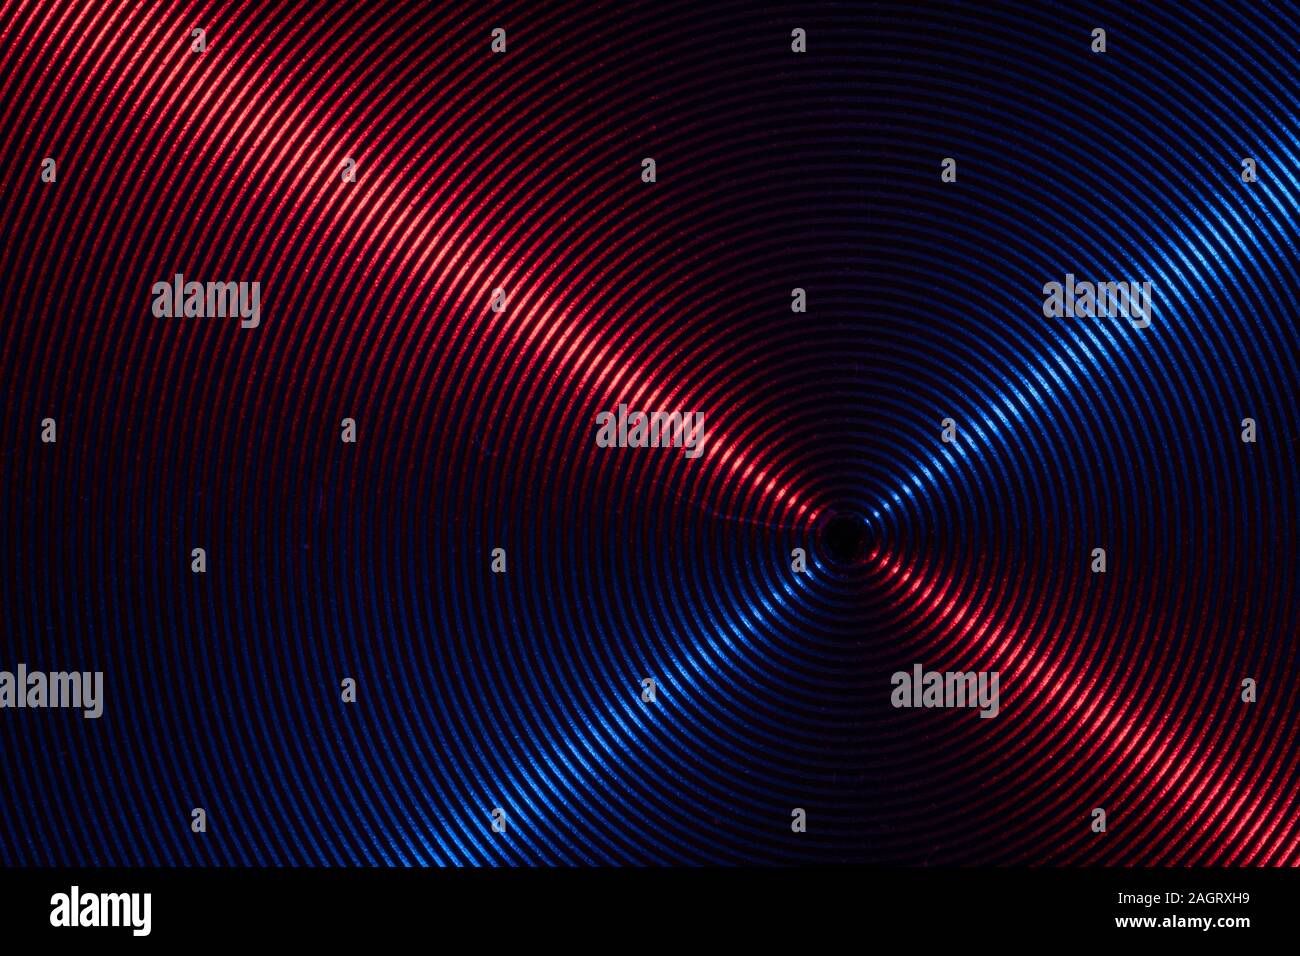 A close up macro photo of circular brushed steel metal texture with crossed red and blue lines Stock Photo